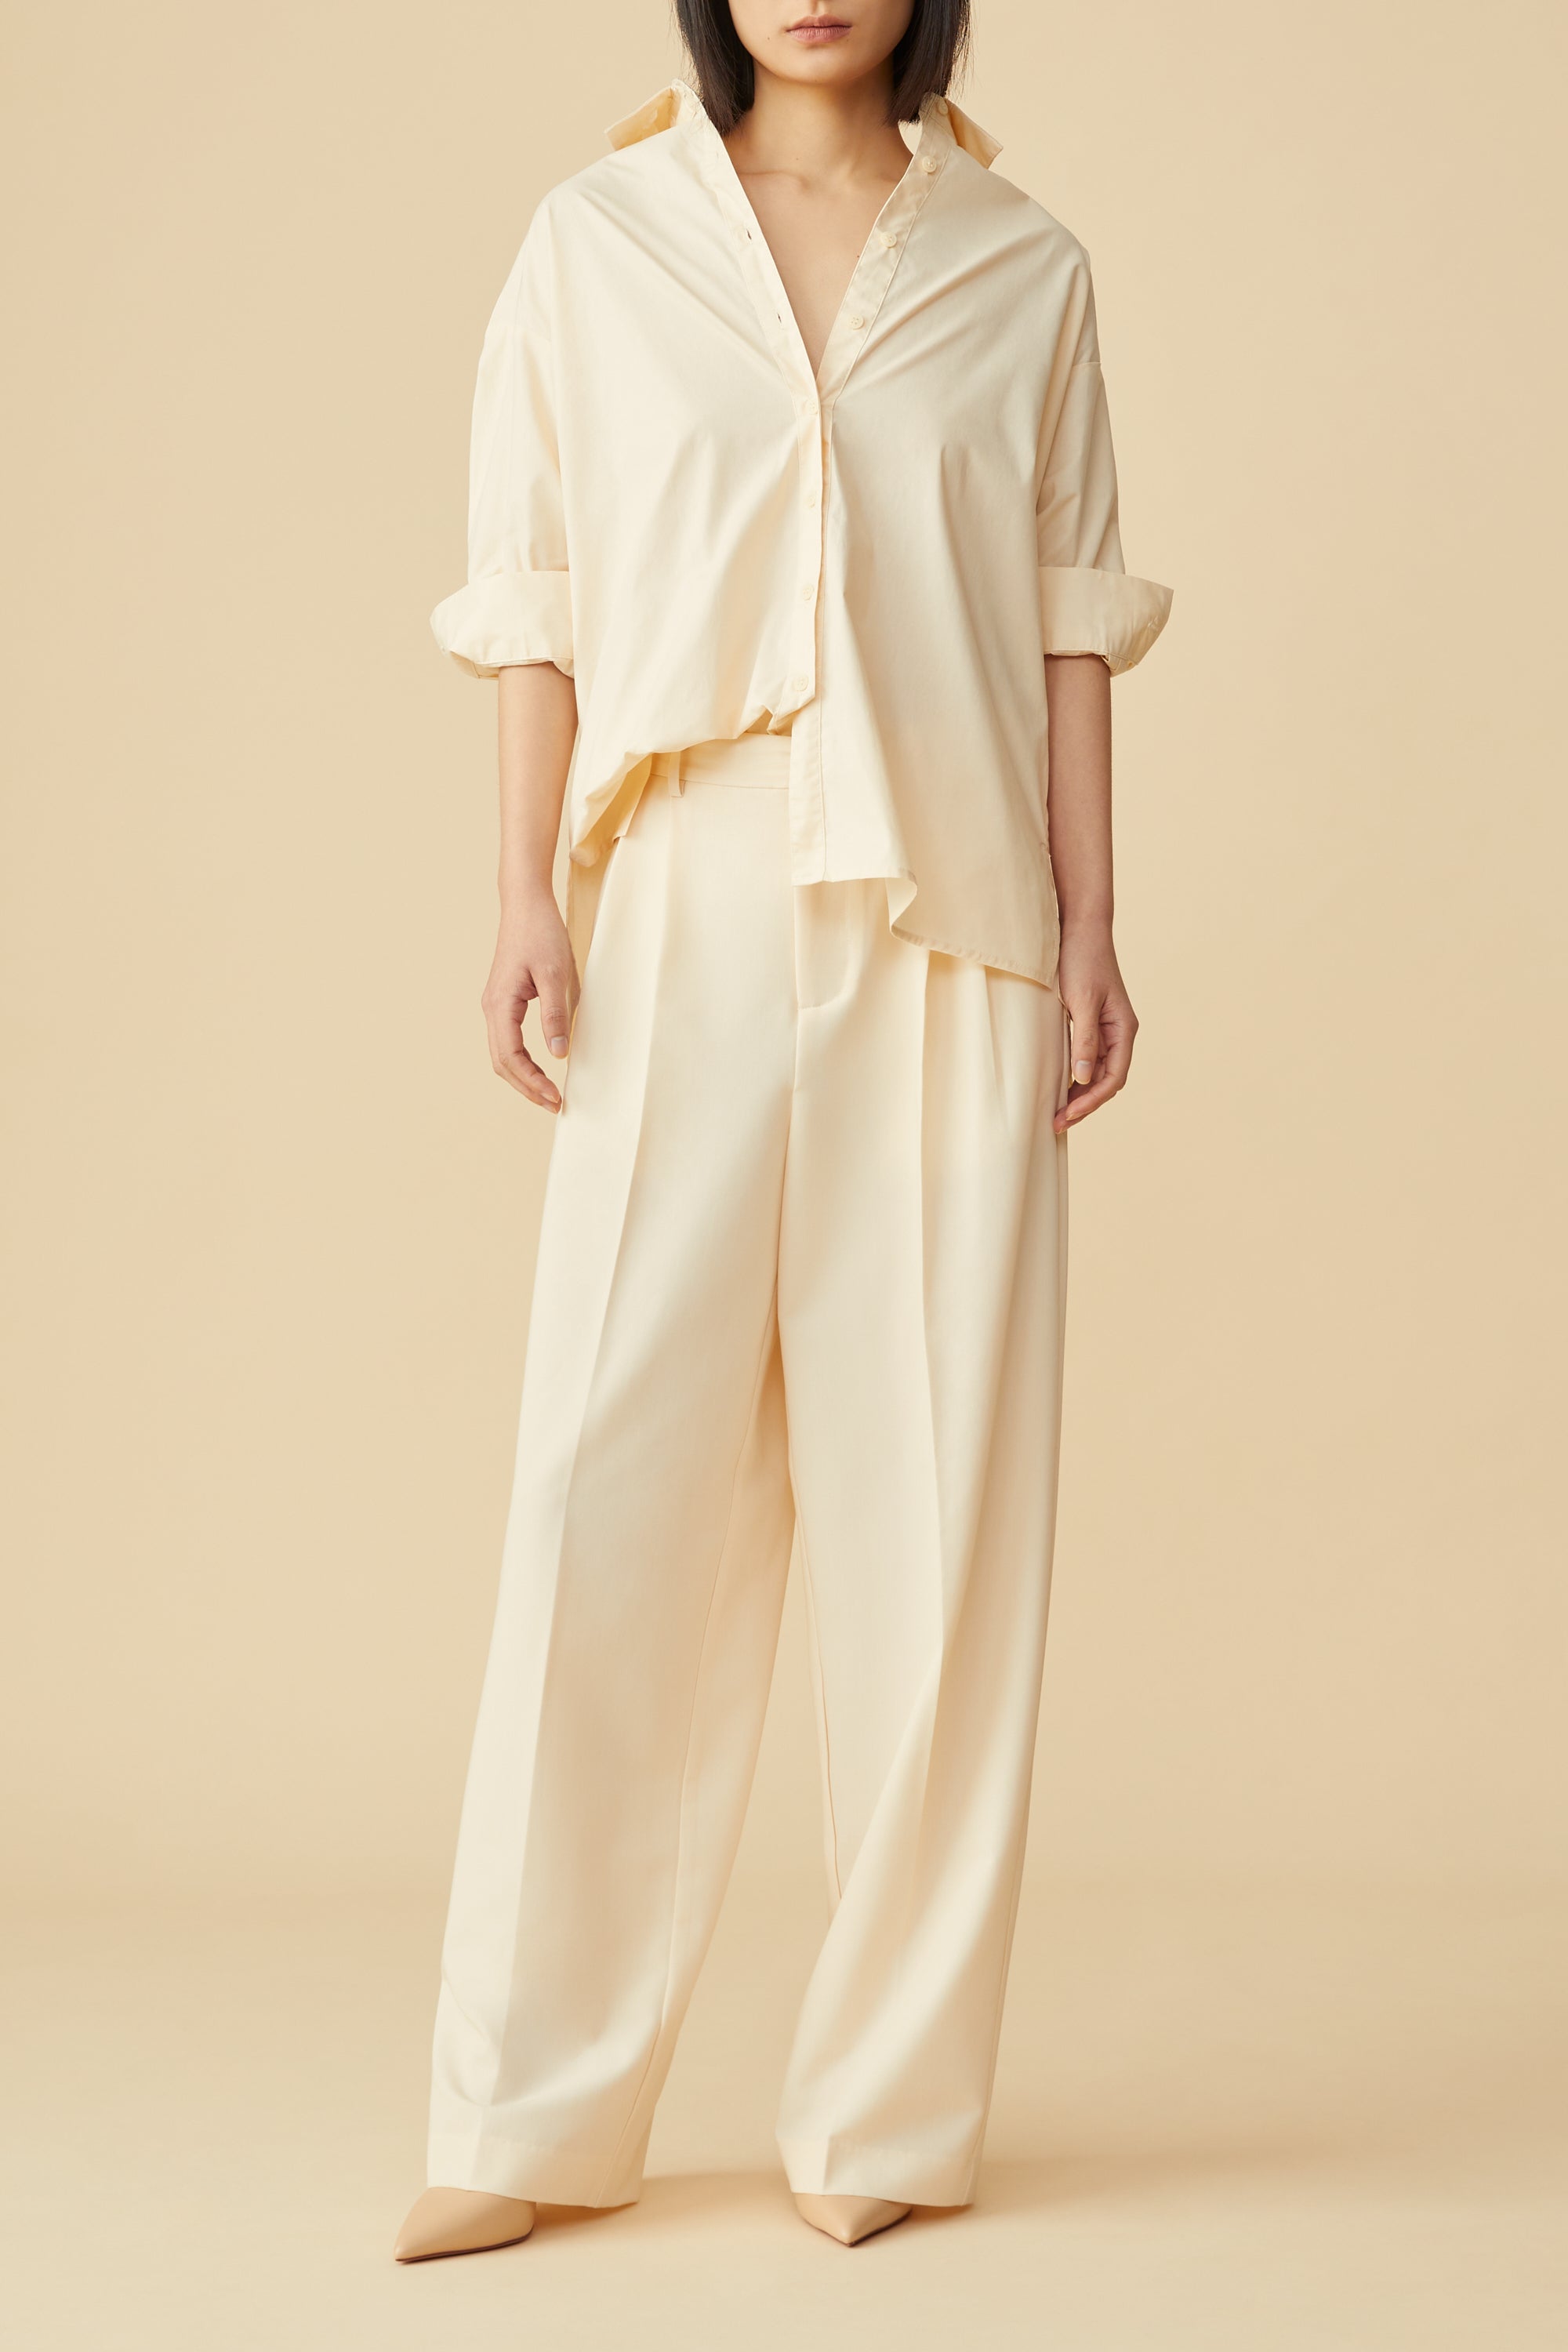 Lonoco's Cora Oversized Cotton Shirt in Ivory Color